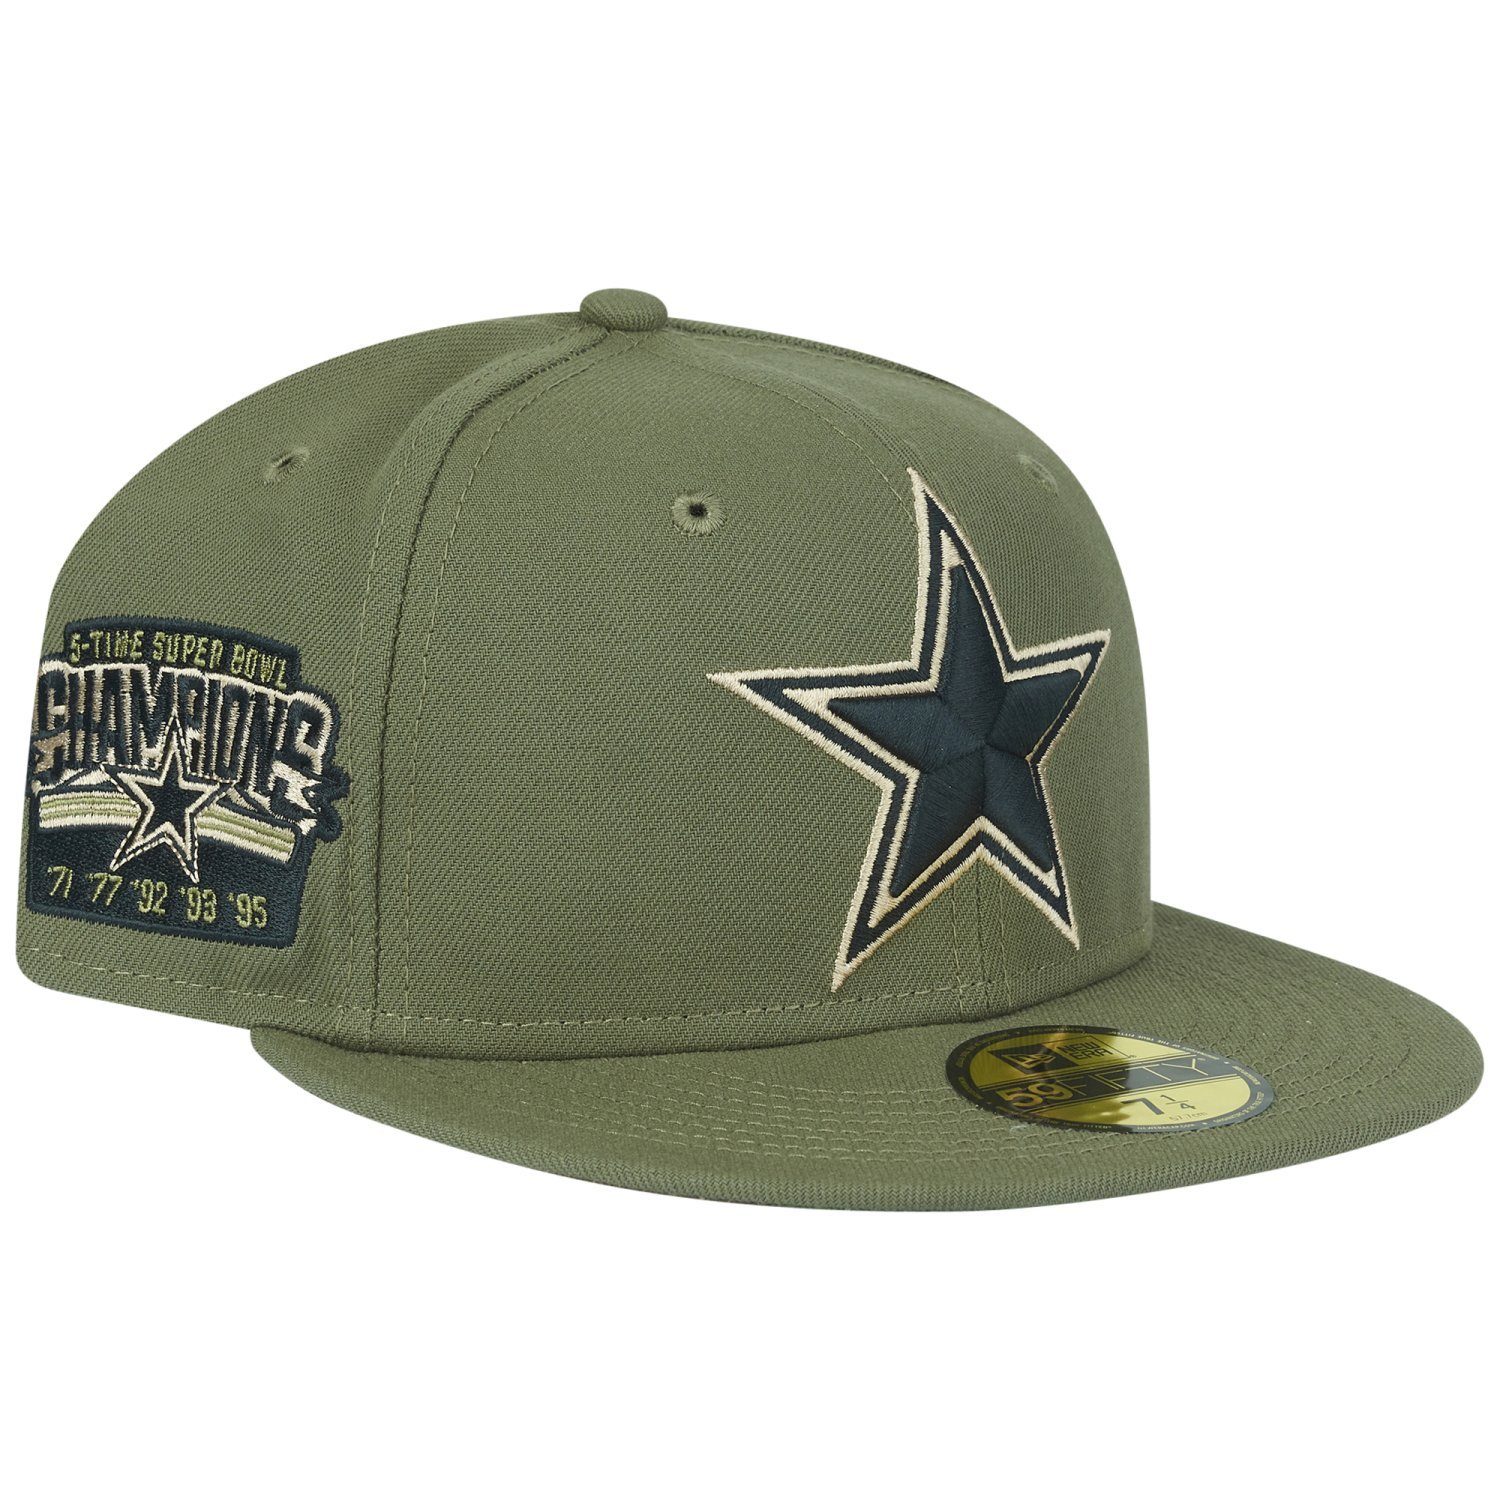 New Era Fitted Cap 59Fifty NFL Throwback Superbowl ProBowl Dallas Cowboys | Fitted Caps